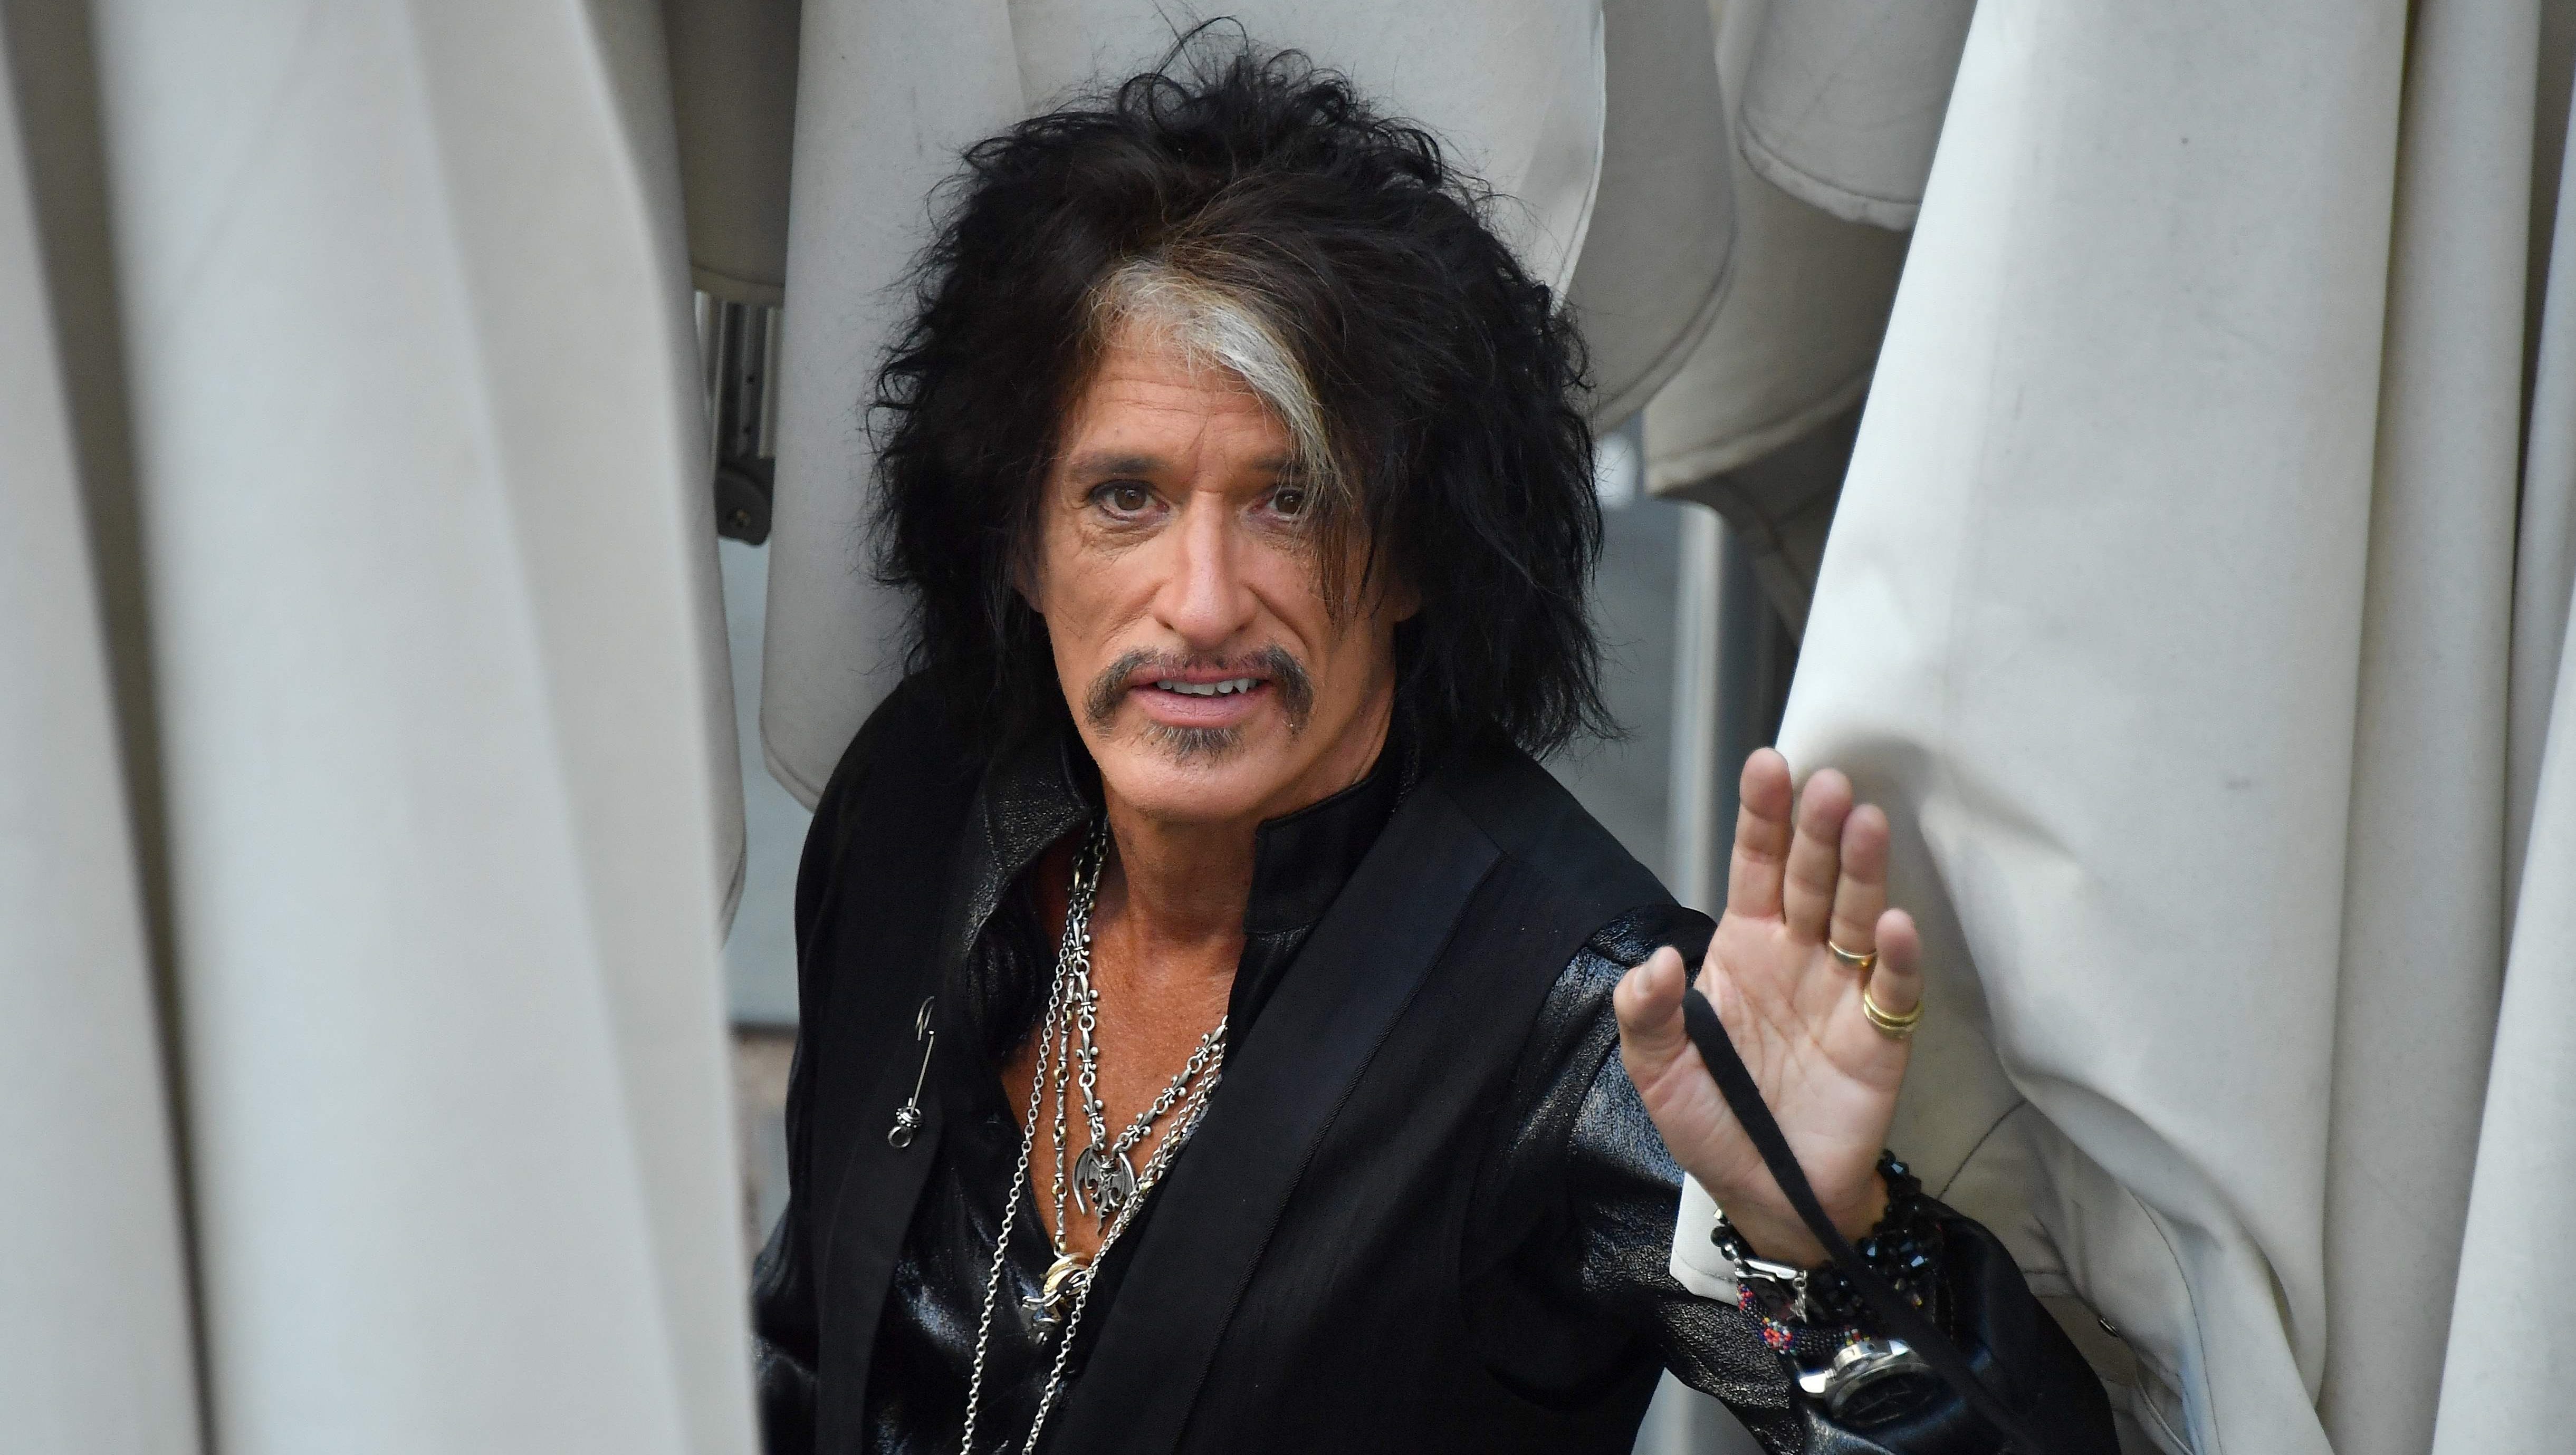 Aerosmith'S Joe Perry Released From Hospital, Is 'Home And Doing Well'